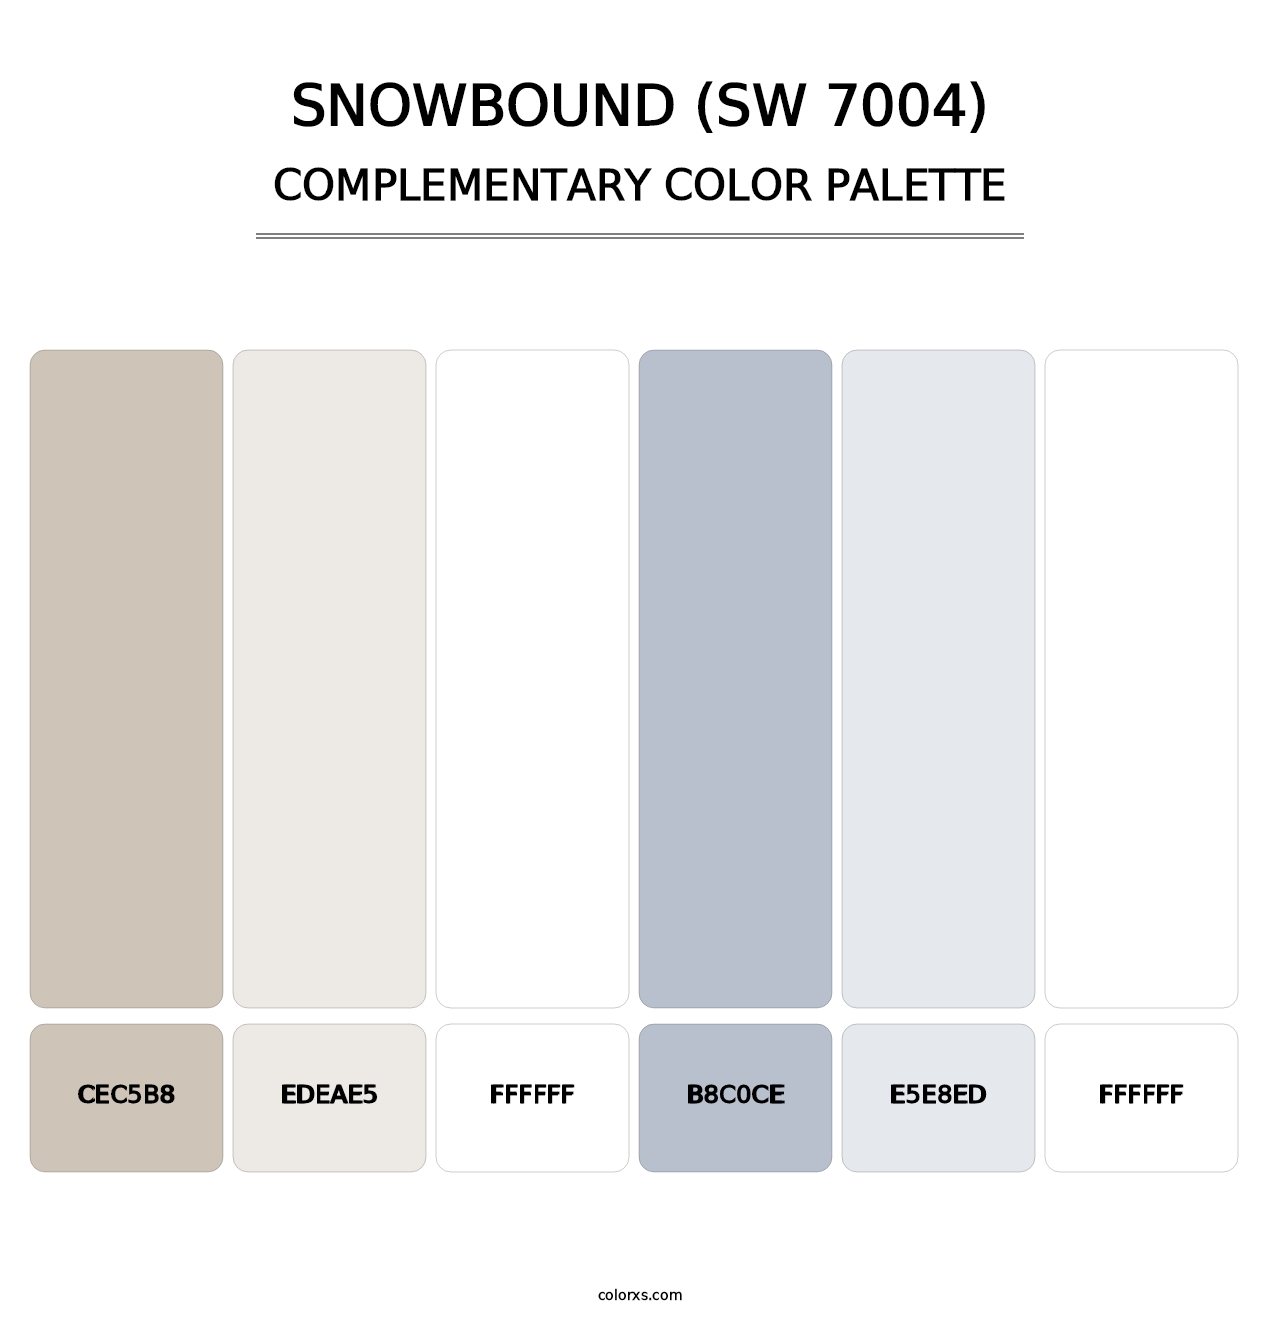 Snowbound (SW 7004) - Complementary Color Palette